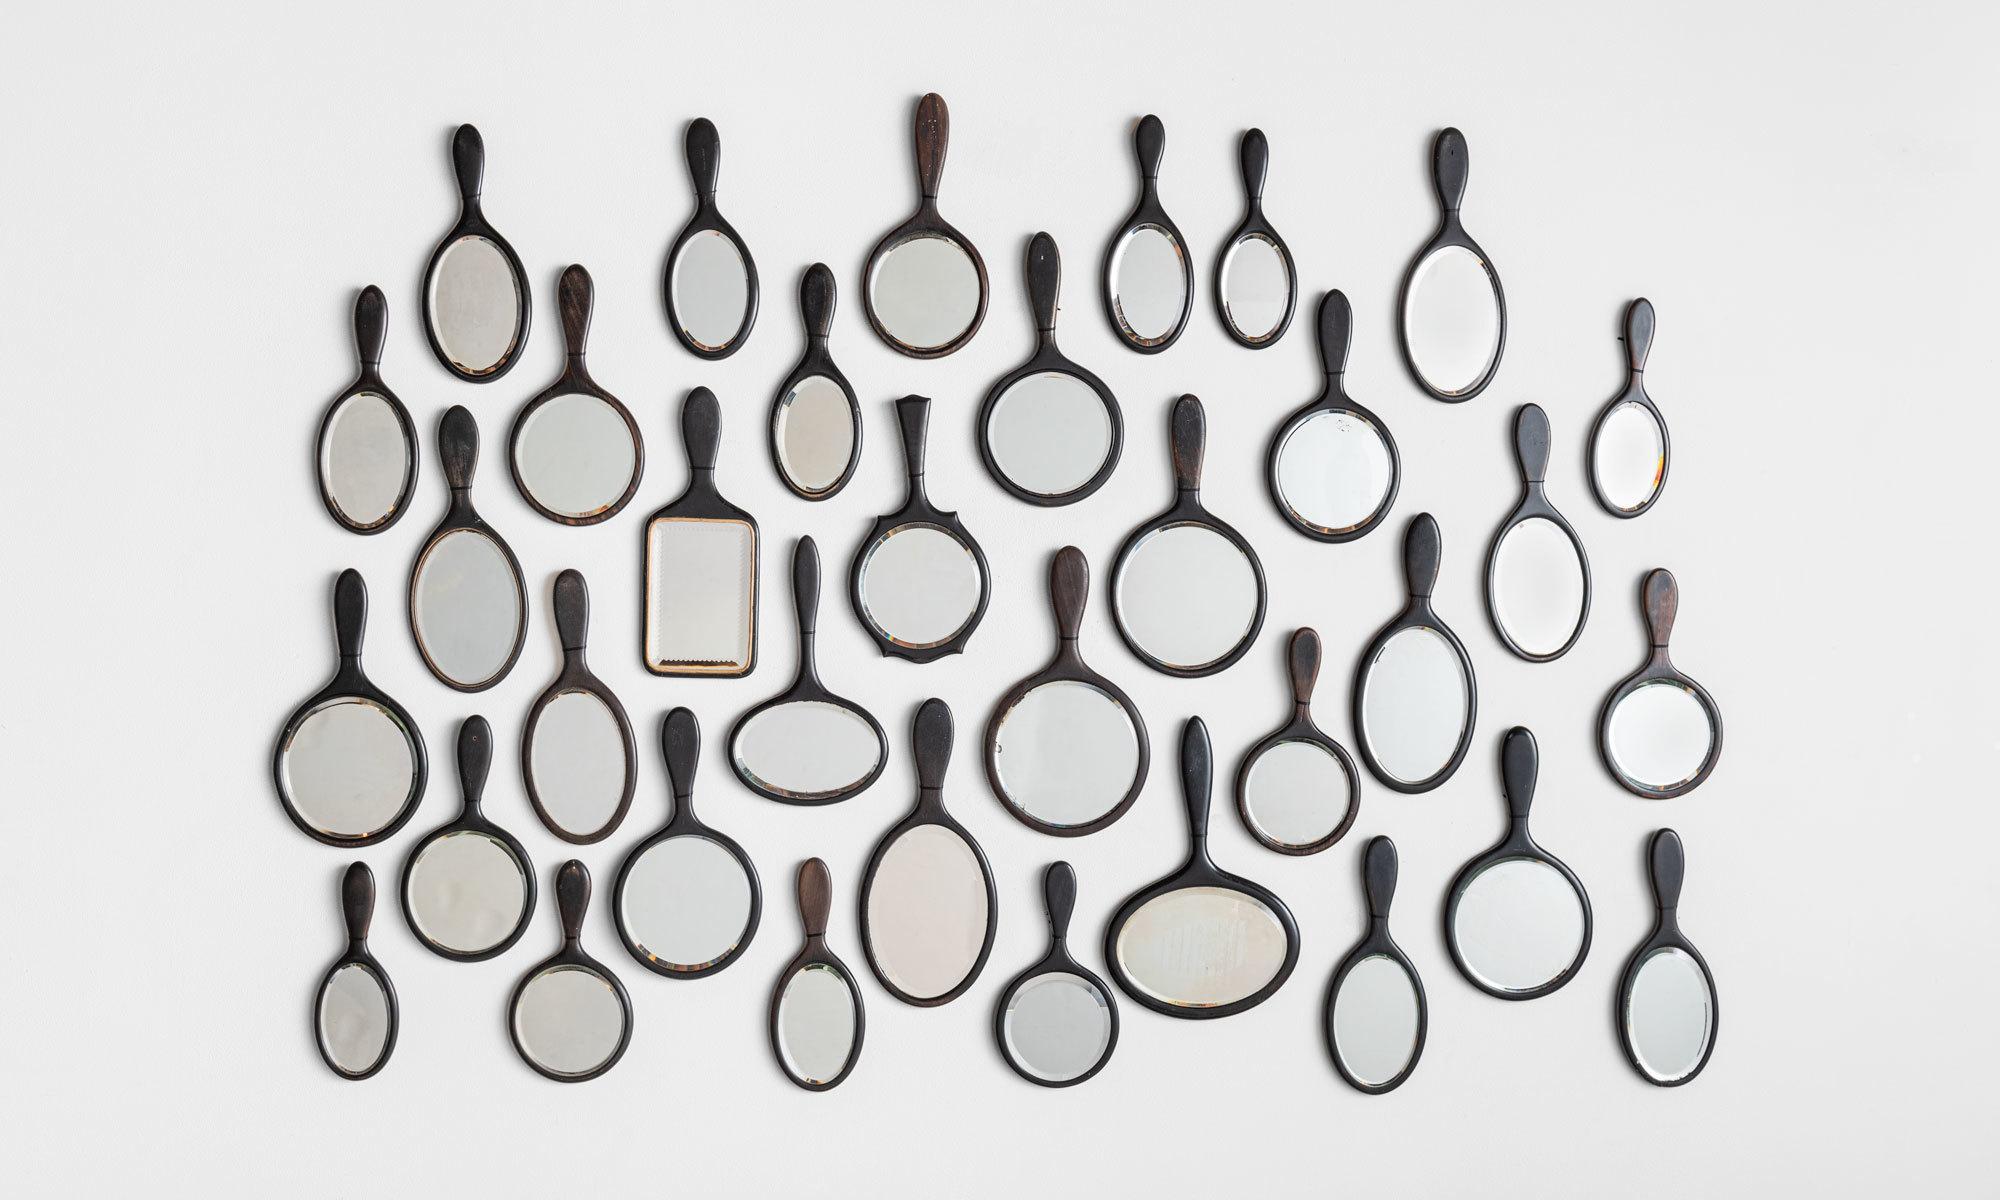 Collection of (35) black hand mirrors, England circa 1880.

An assortment of small forms with slight variations in size and shape.